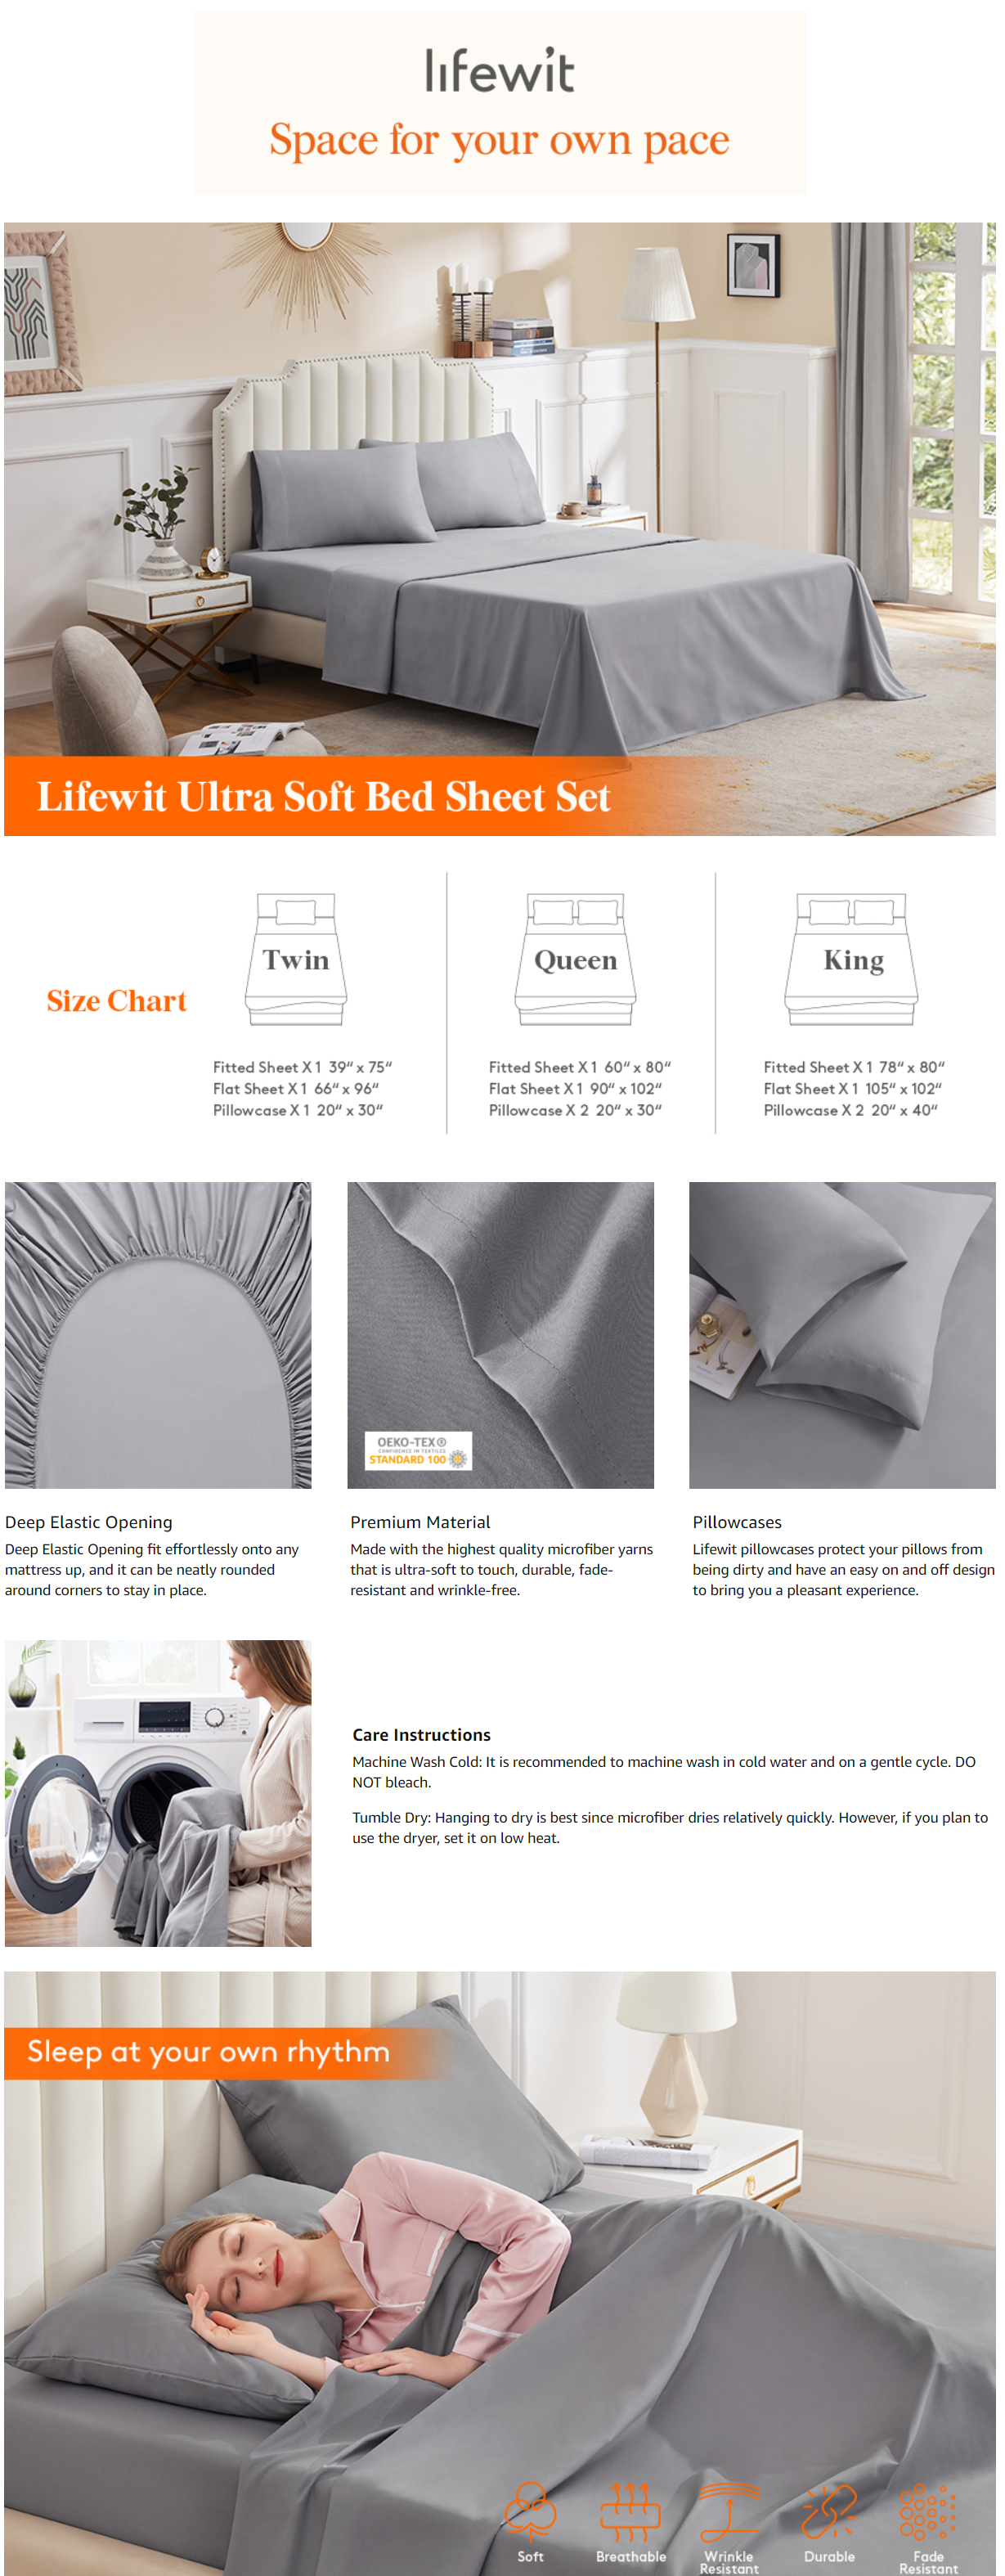 https://cdn.shopify.com/s/files/1/1593/1249/files/Lifewit-Bedding-Breathable-Cooling-Pillowcase.png?v=1647596309